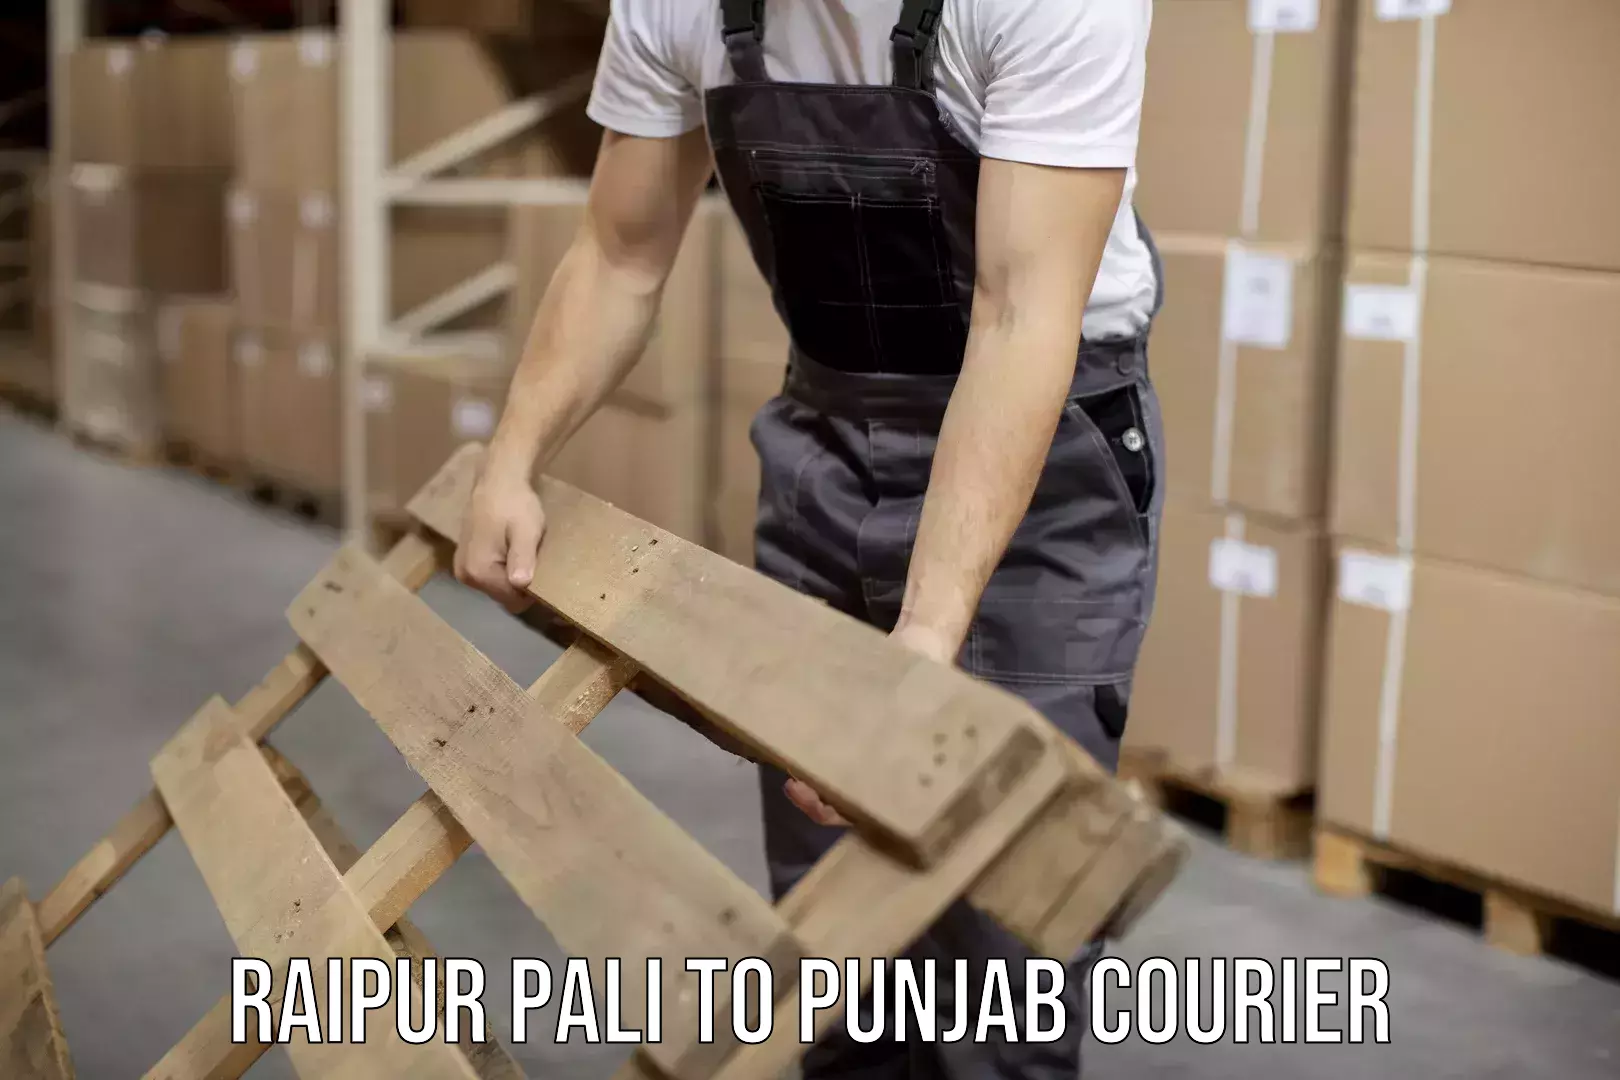 Sustainable shipping practices Raipur Pali to Ajnala